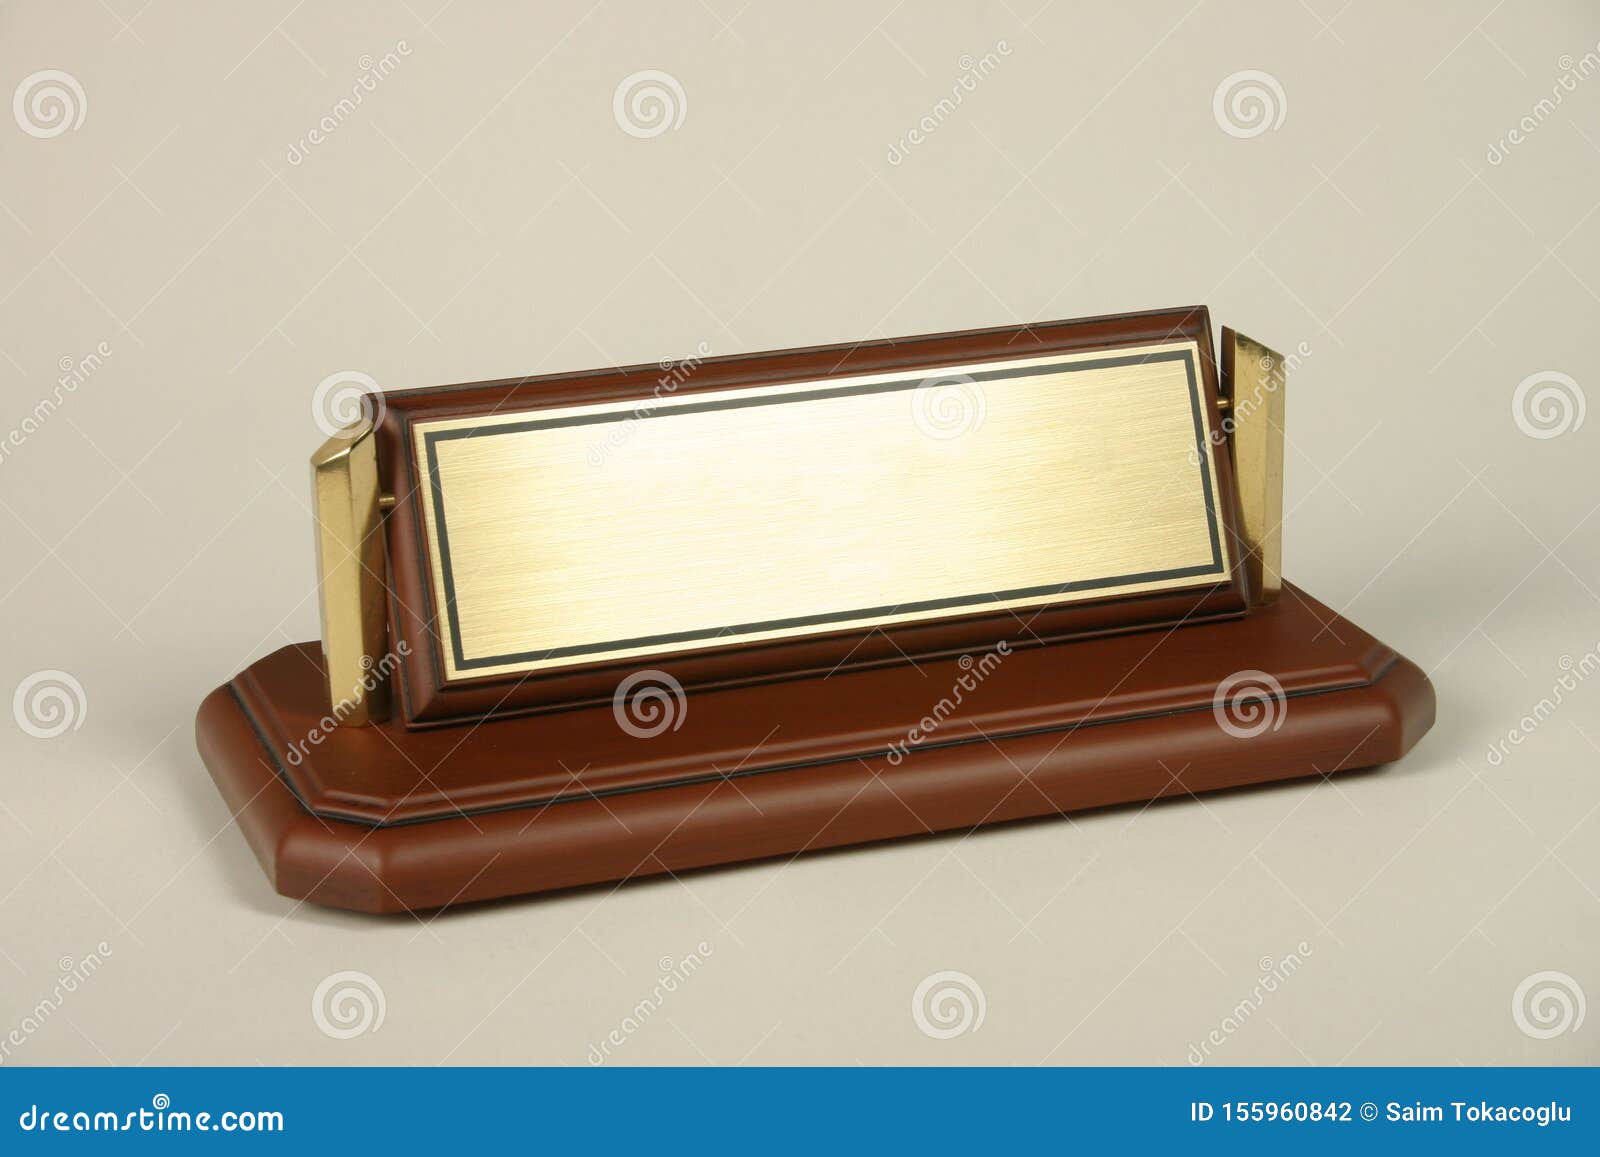 Wooden Base For Writing Name And Title Stock Photo Image Of